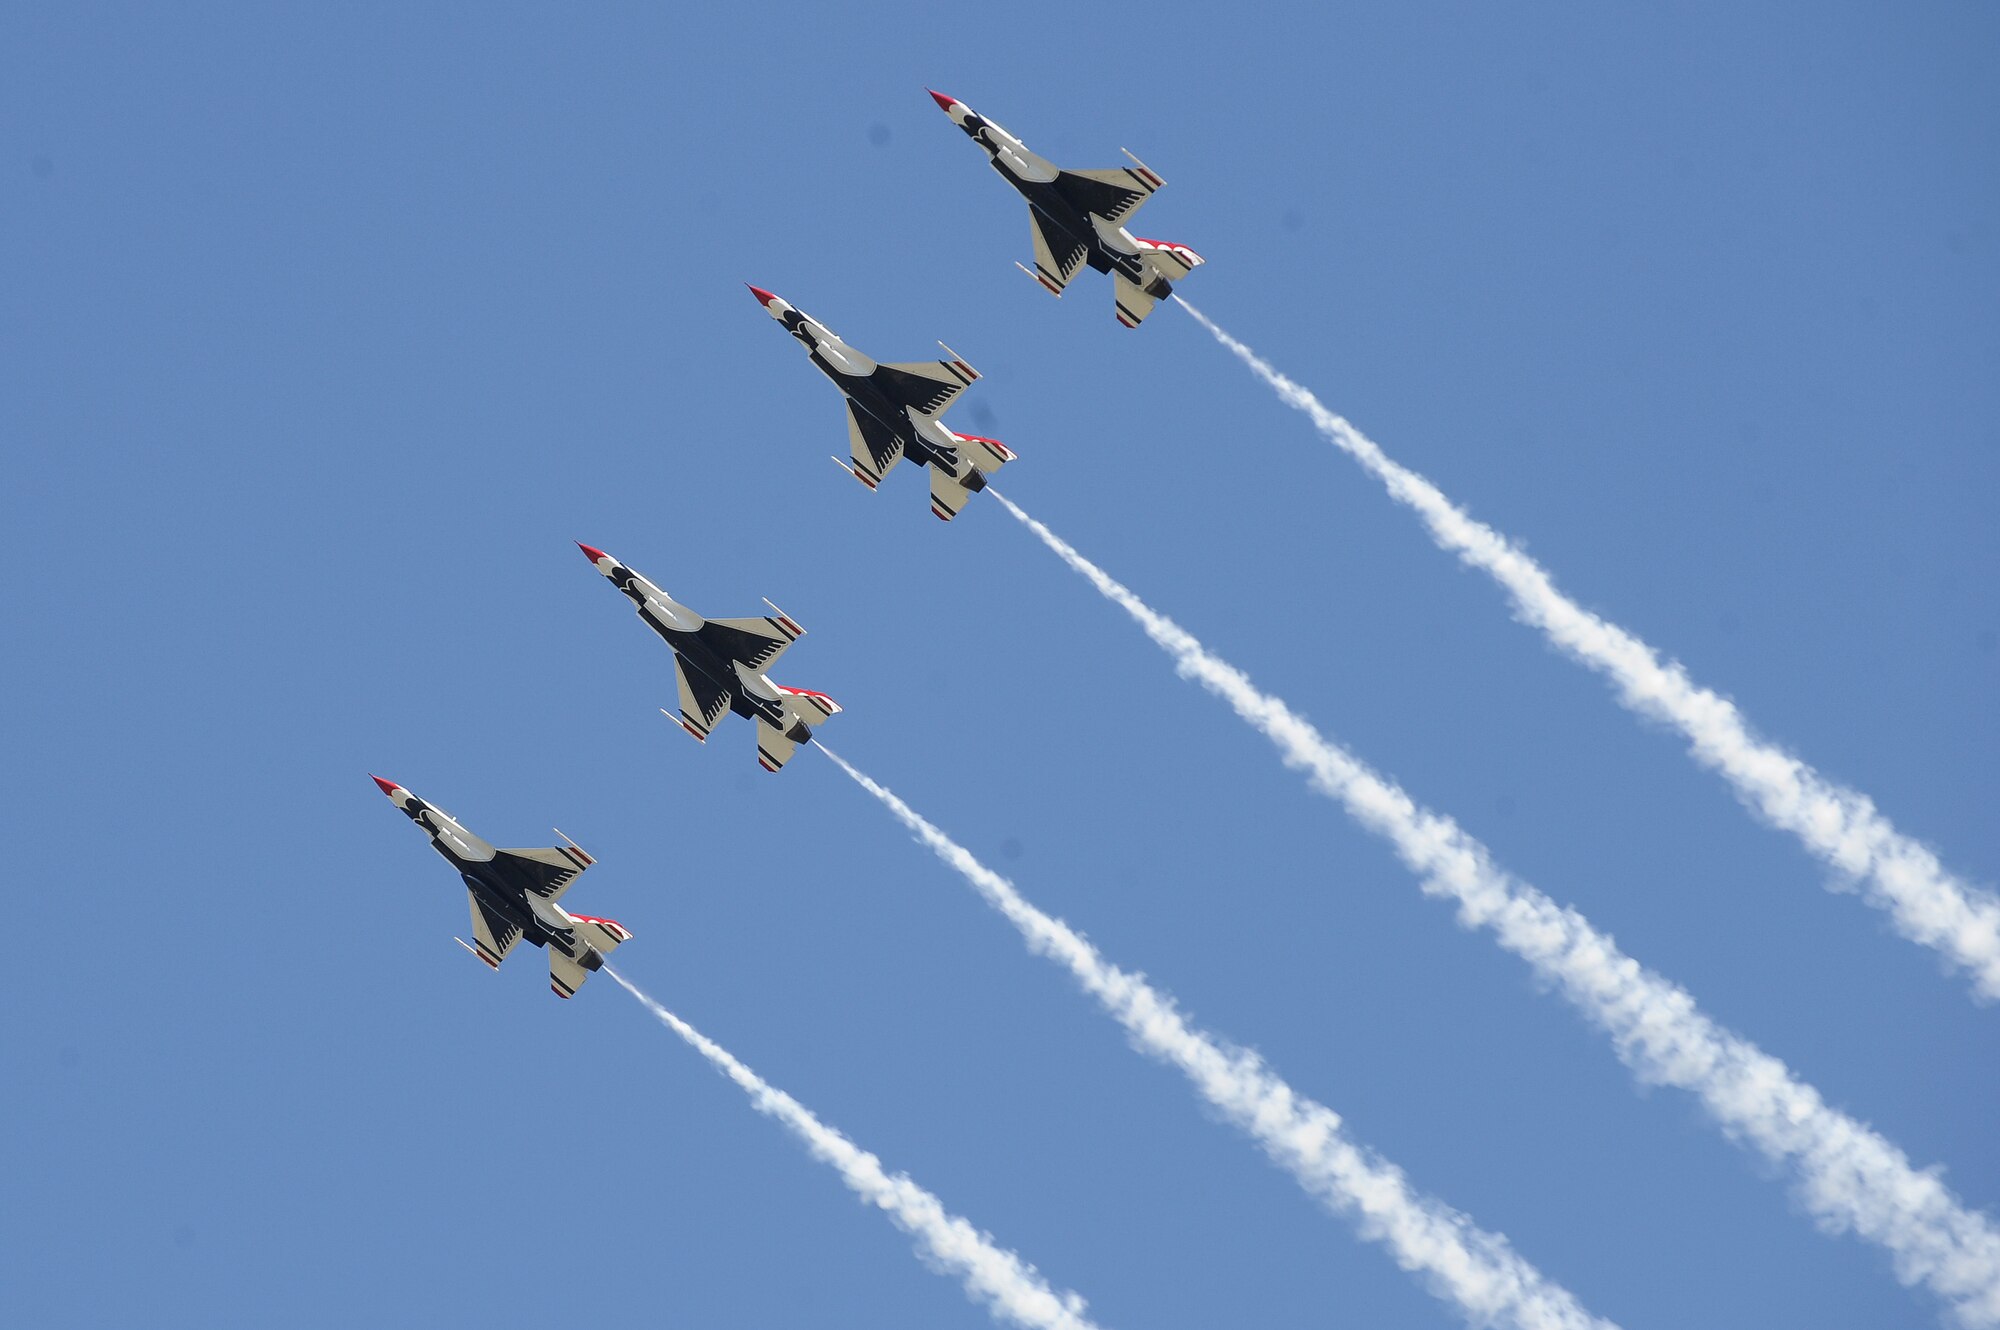 The Thunderbirds, officially known as the U.S. Air Force Air Demonstration Squadron, perform precision aerial maneuvers to demonstrate the capabilities the F-16 Fighter Falcon, the Air Force’s premier multi-role fighter jet, for special needs families, Scott Air Force Base, Ill., June 9, 2017.   To prepare for its demonstration role, the only modifications needed are installing a smoke-generating system in the space normally reserved for the 20mm cannon and the painting of the aircraft in Thunderbird colors. Since the team’s inception, 325 officers have worn the distinguished emblem of “America’s Ambassadors in Blue” and over 300 million people have witnessed their show.  . (U.S. Air Force photo by Tech. Sgt. Maria Castle)